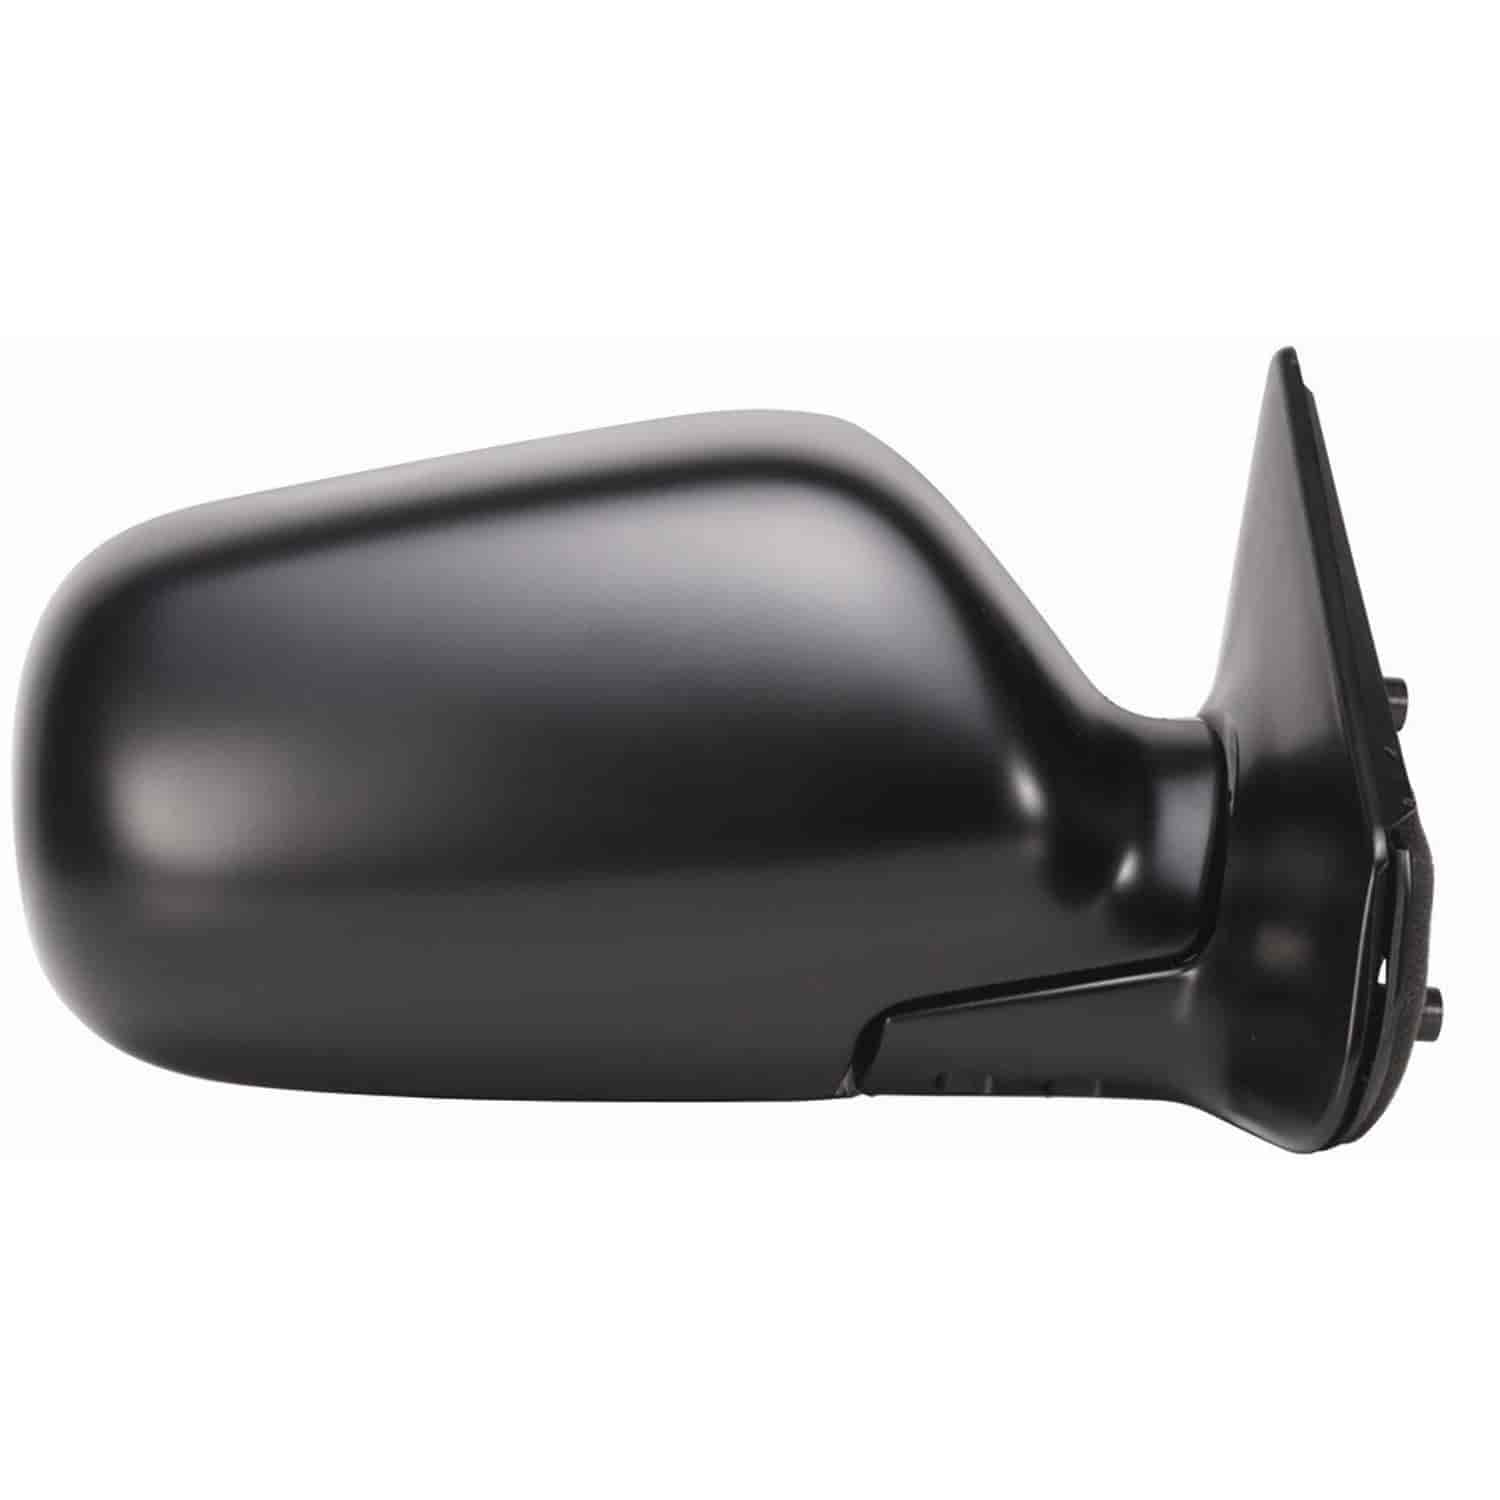 OEM Style Replacement mirror for 95-99 SUBARU Legacy passenger side mirror tested to fit and functio